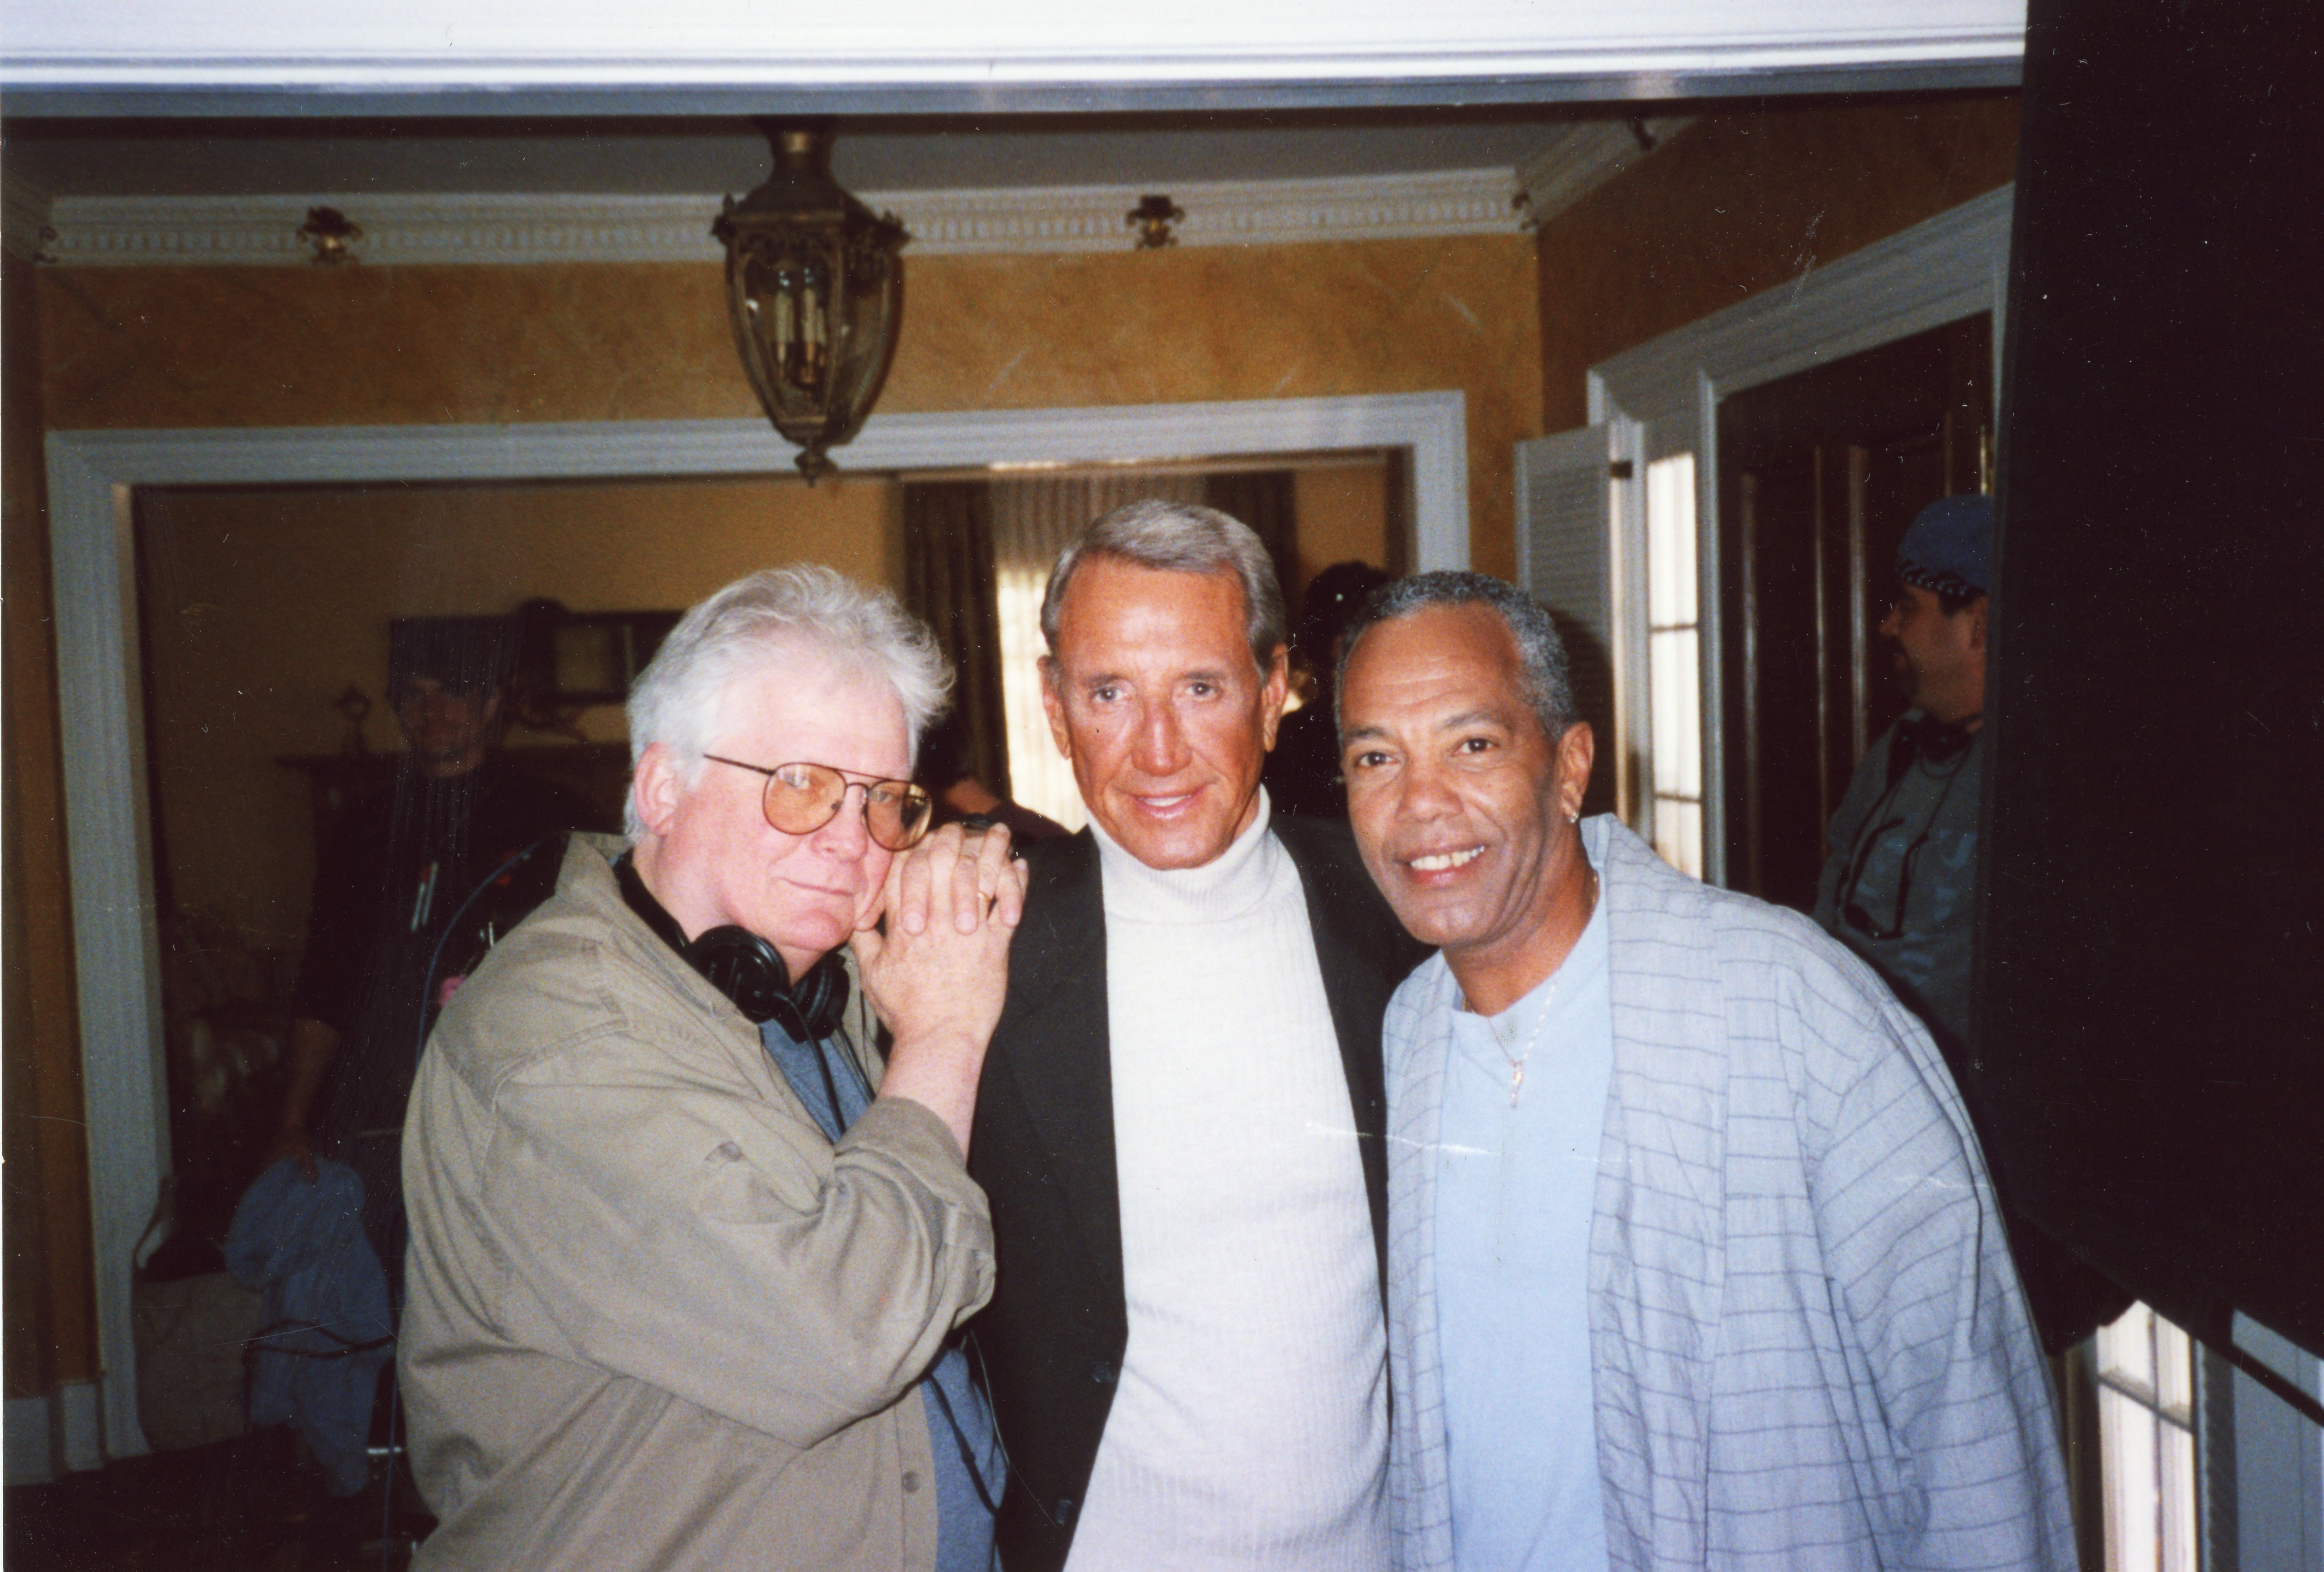 From the film 'TIME-LAPSE' with the Director David Worth and Roy Scheider